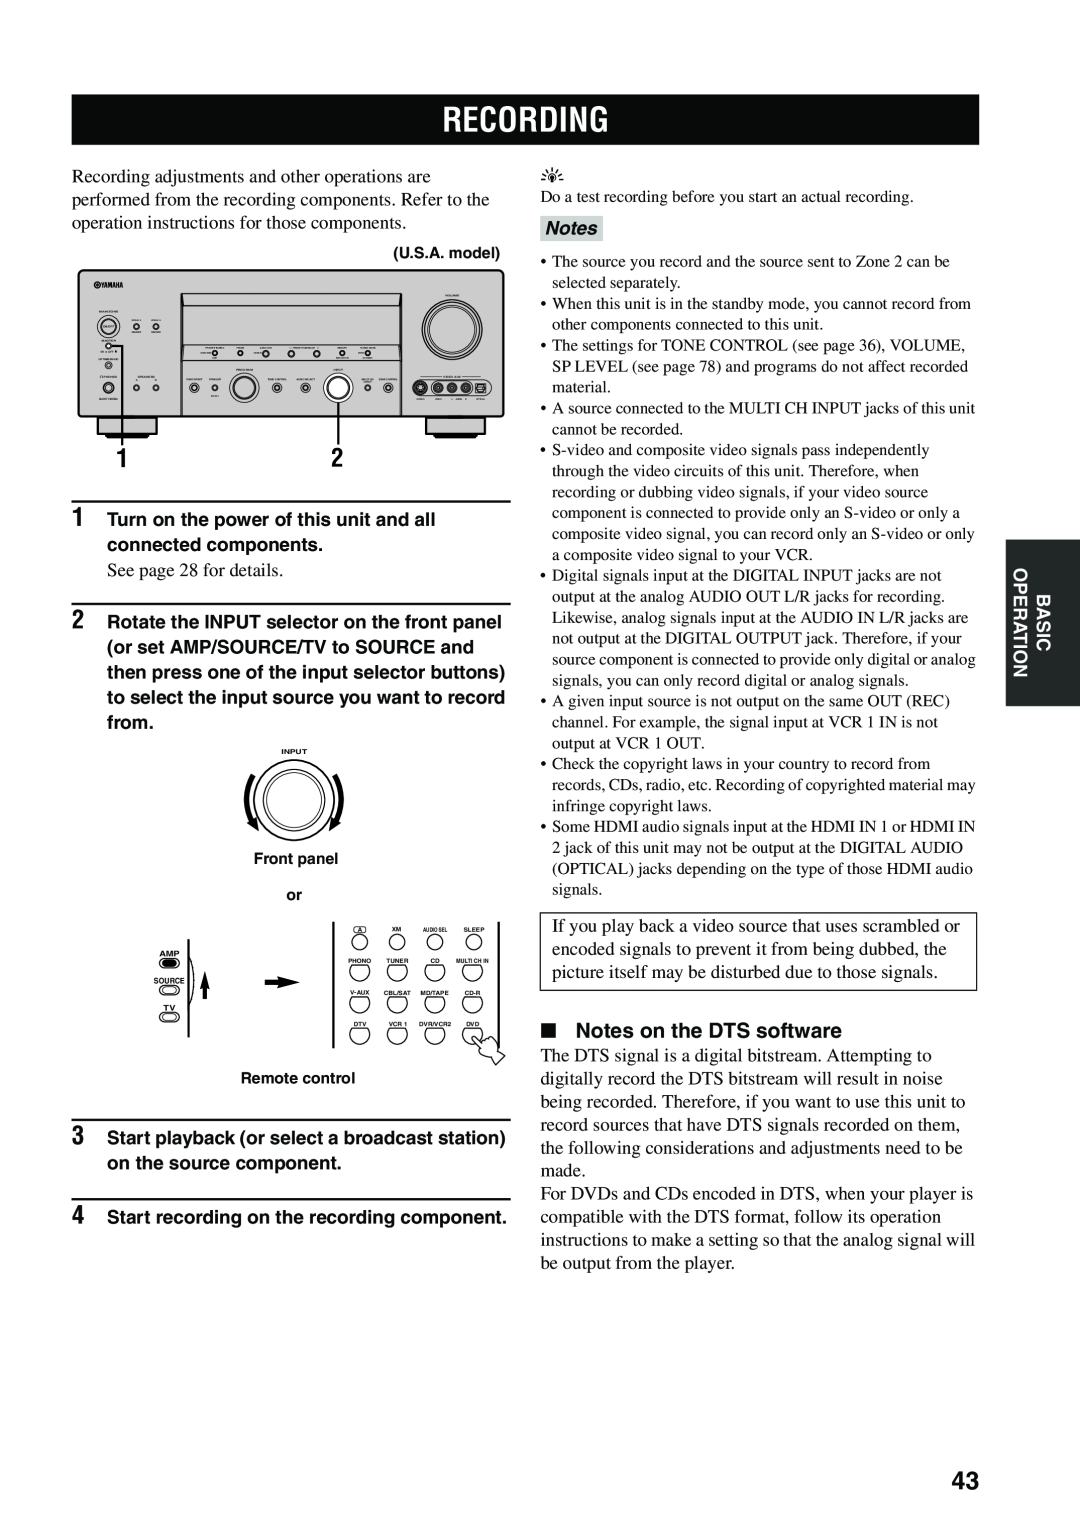 Yamaha HTR-5990 owner manual Recording, Notes on the DTS software 